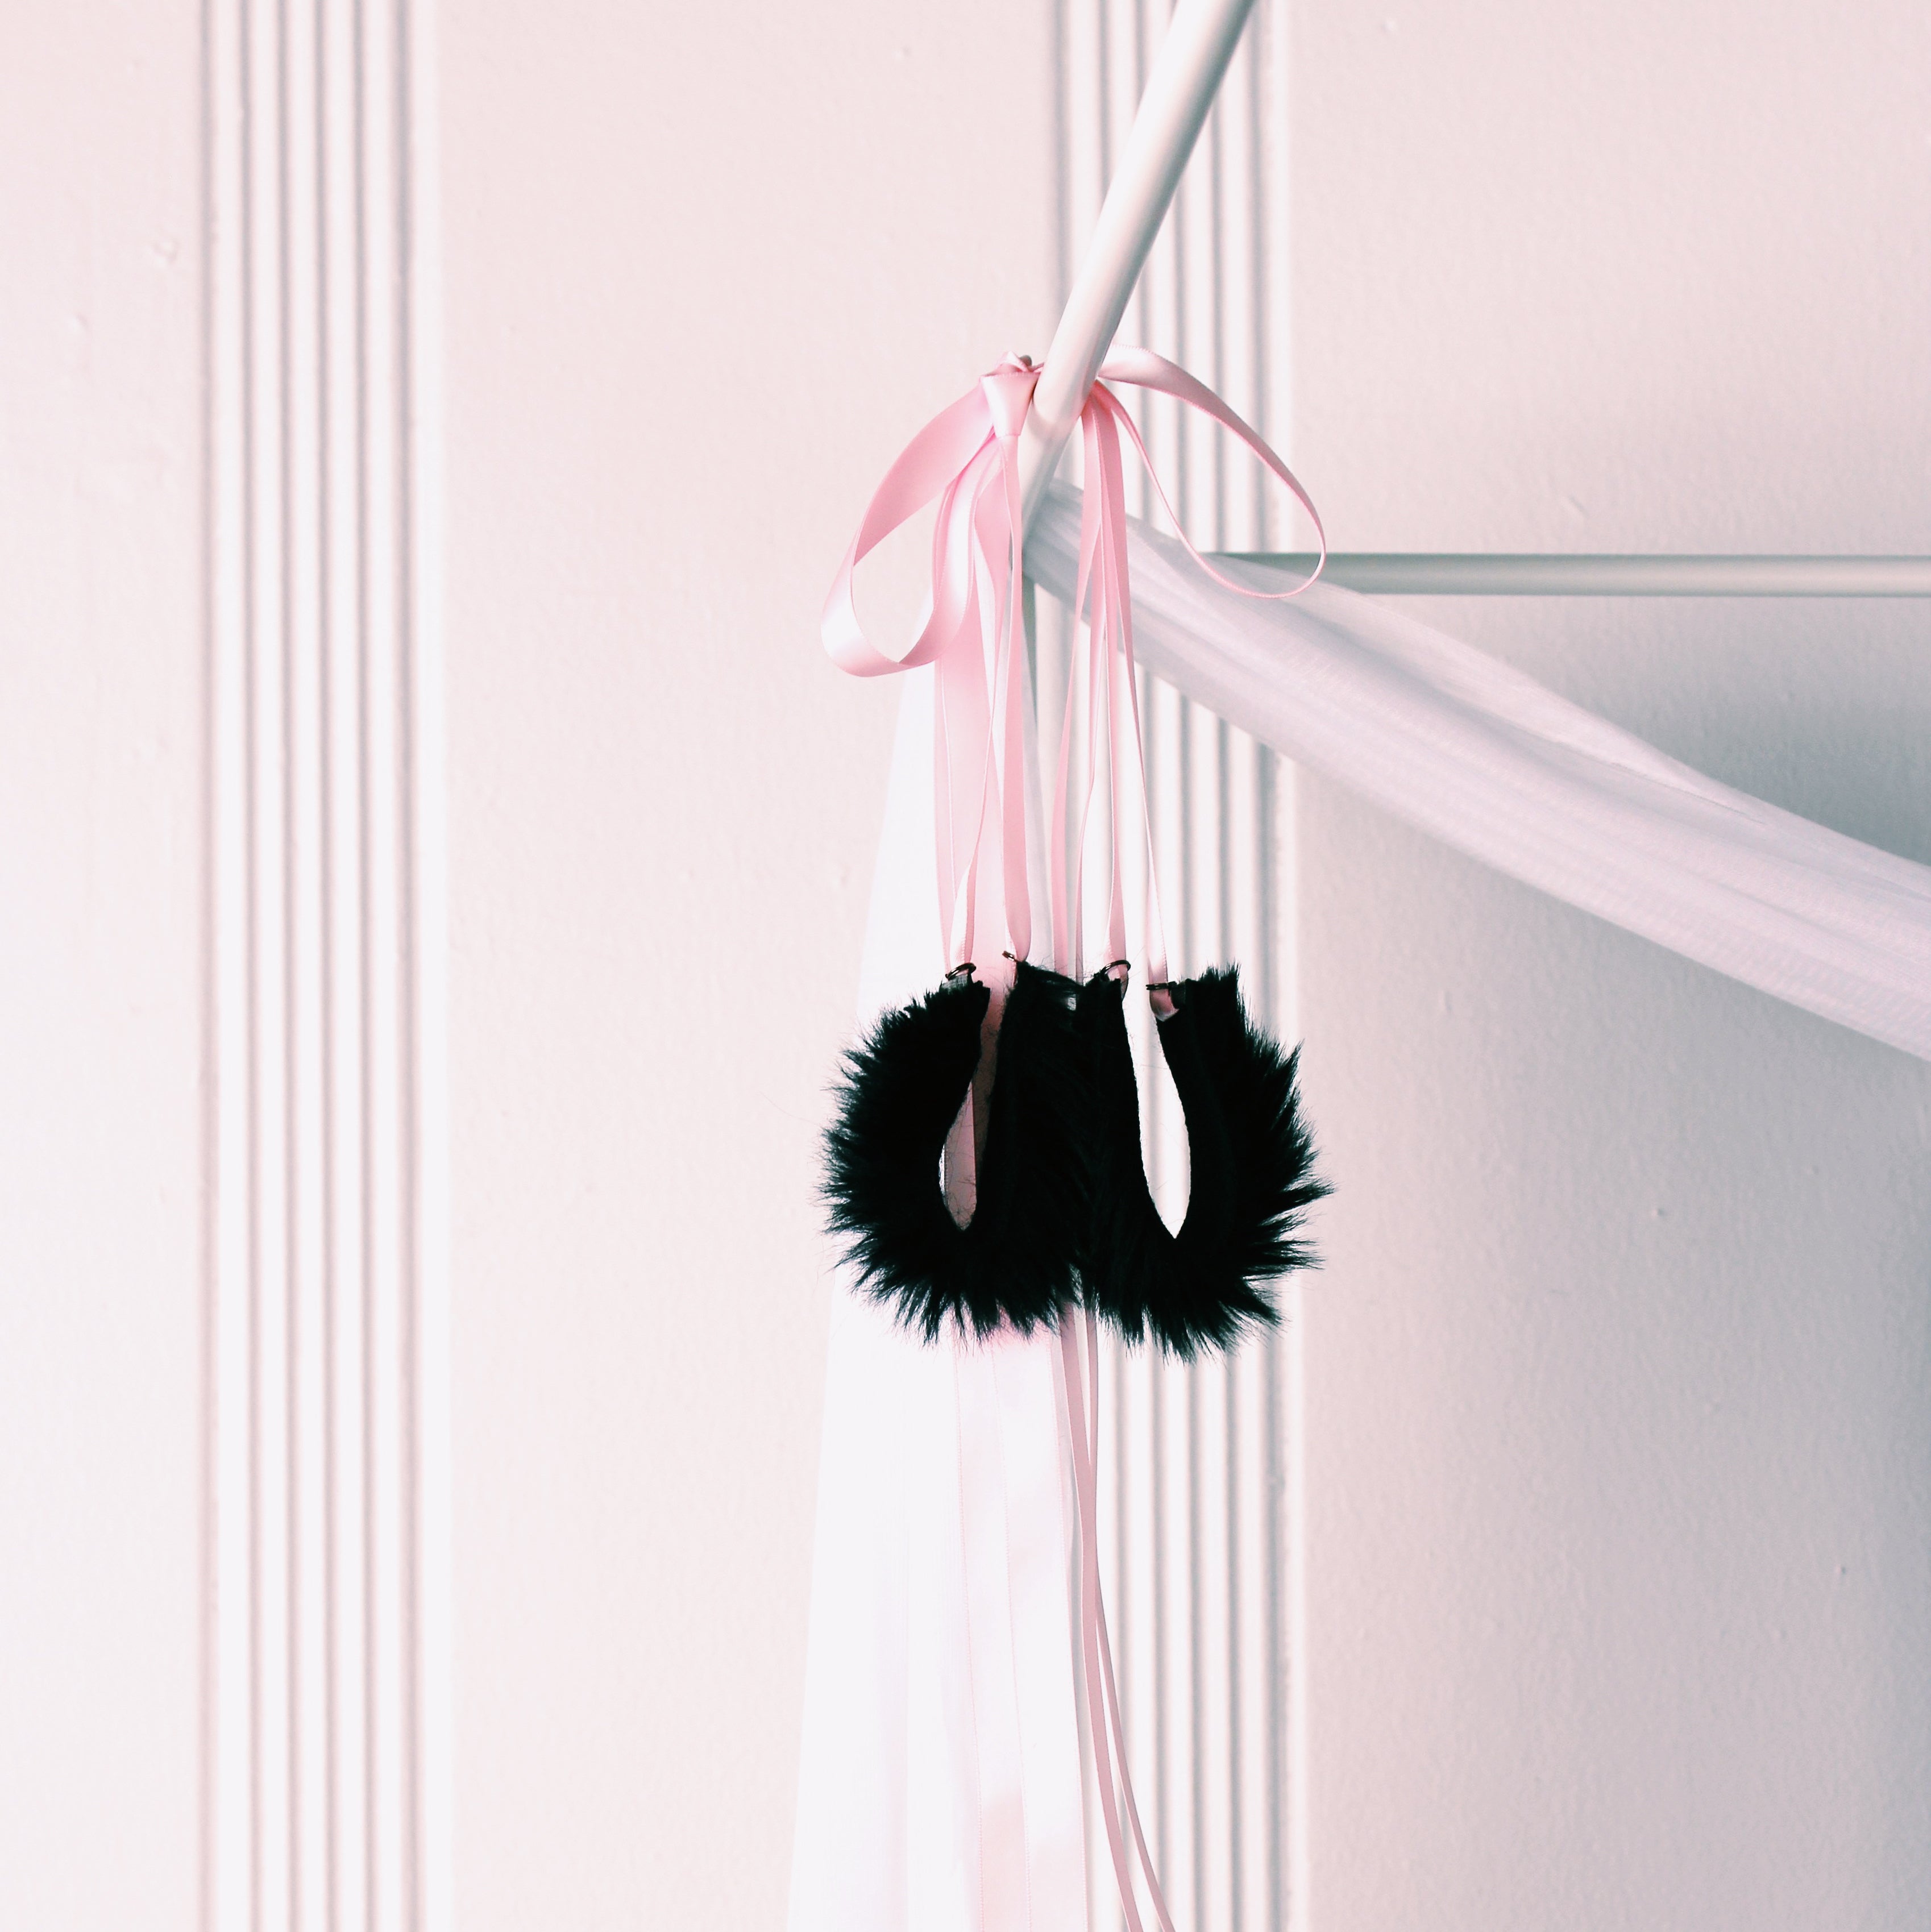 Black Faux Fur Handcuffs with Long Pink Satin Tyes on Bed